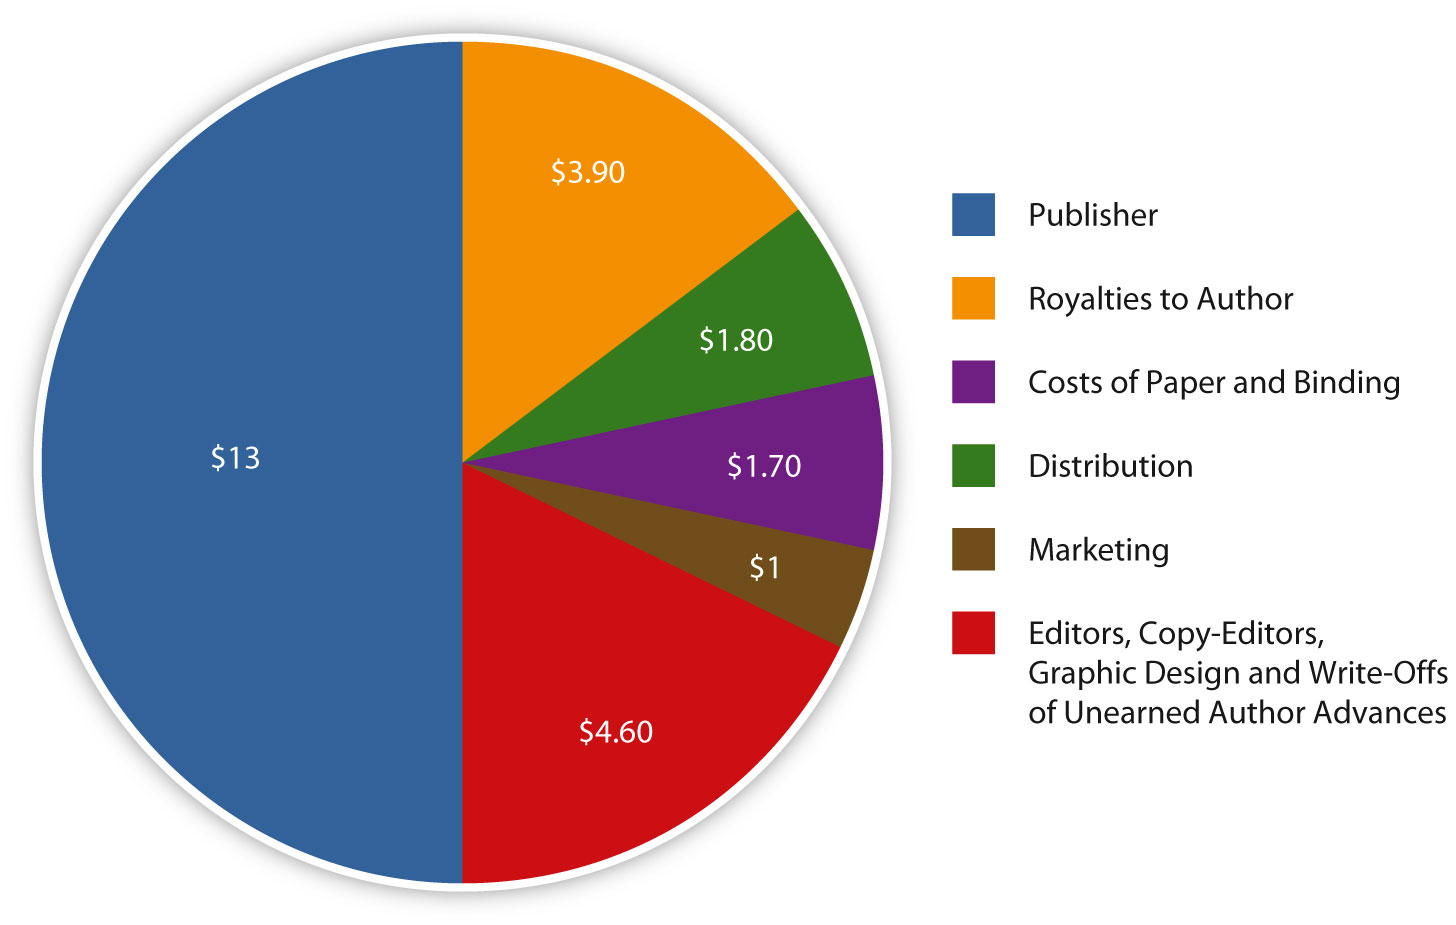 Pie chart showing what various things contribute to the cost of a book: publisher, royalties to authors, costs of the paper and binding, distribution, marketing, and editing/design